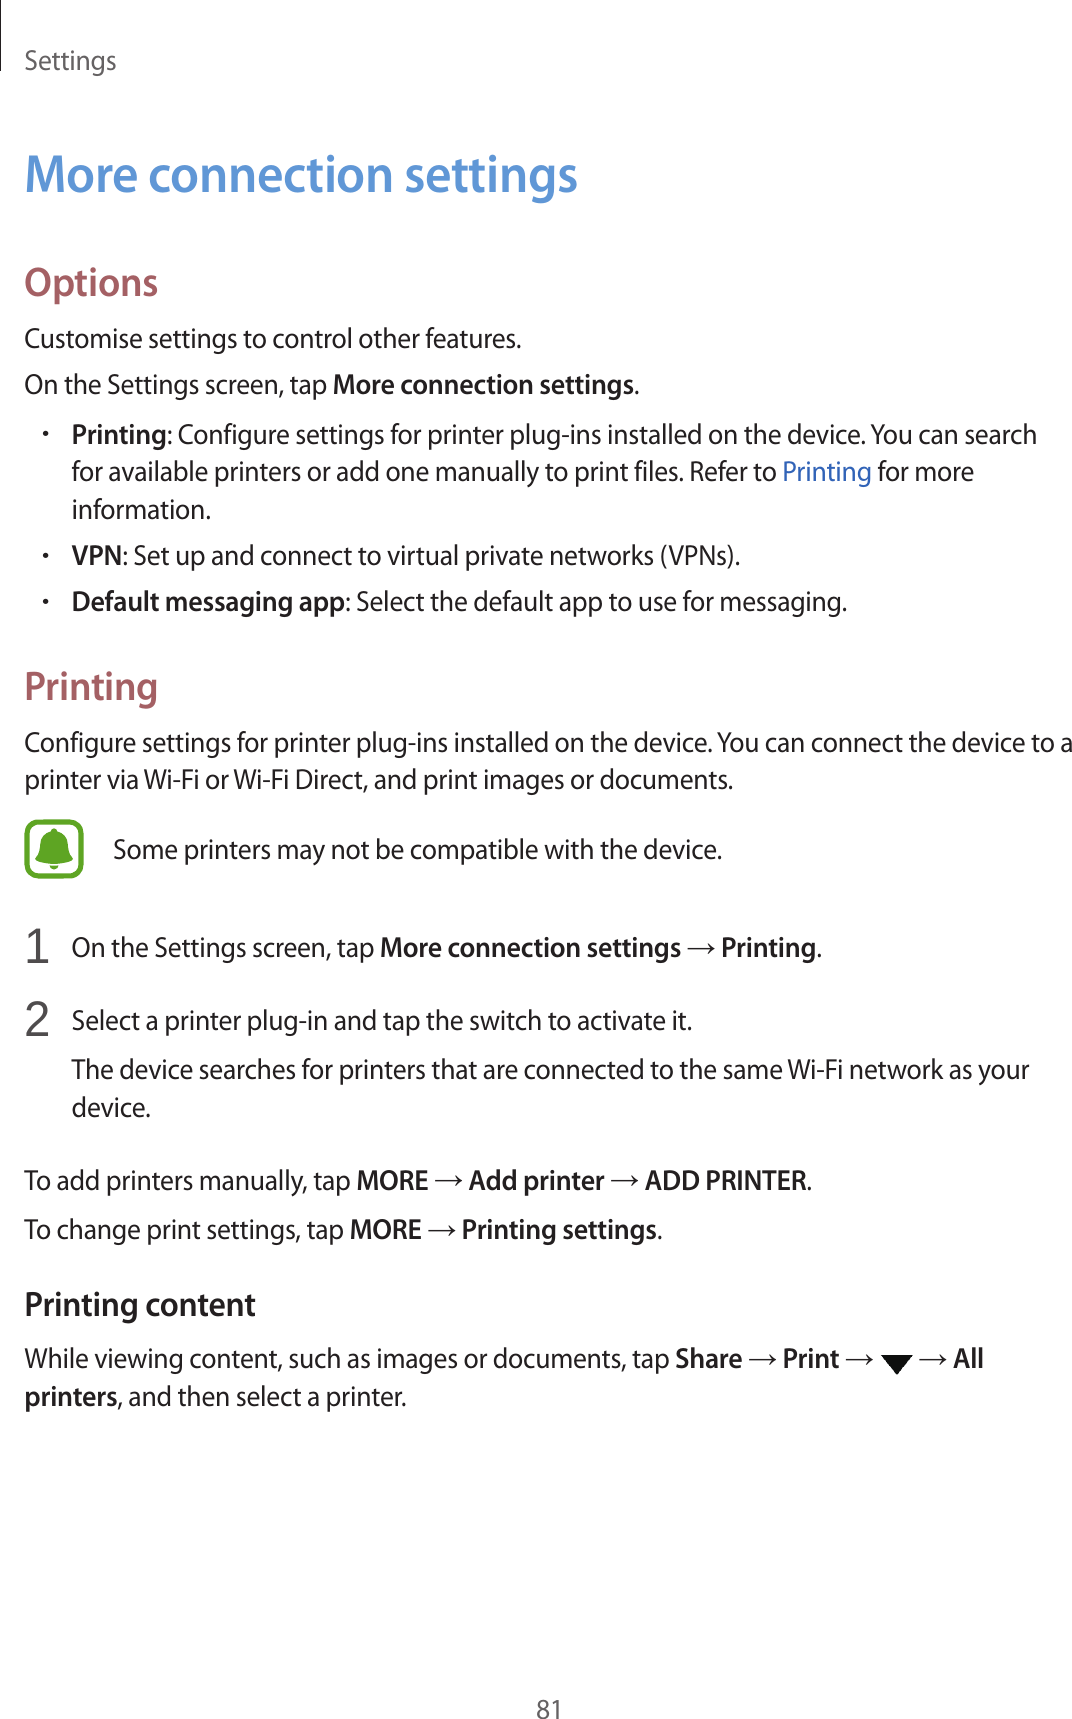 Settings81More connection settingsOptionsCustomise settings to control other features.On the Settings screen, tap More connection settings.•Printing: Configure settings for printer plug-ins installed on the device. You can search for available printers or add one manually to print files. Refer to Printing for more information.•VPN: Set up and connect to virtual private networks (VPNs).•Default messaging app: Select the default app to use for messaging.PrintingConfigure settings for printer plug-ins installed on the device. You can connect the device to a printer via Wi-Fi or Wi-Fi Direct, and print images or documents.Some printers may not be compatible with the device.1  On the Settings screen, tap More connection settings → Printing.2  Select a printer plug-in and tap the switch to activate it.The device searches for printers that are connected to the same Wi-Fi network as your device.To add printers manually, tap MORE → Add printer → ADD PRINTER.To change print settings, tap MORE → Printing settings.Printing contentWhile viewing content, such as images or documents, tap Share → Print →   → All printers, and then select a printer.